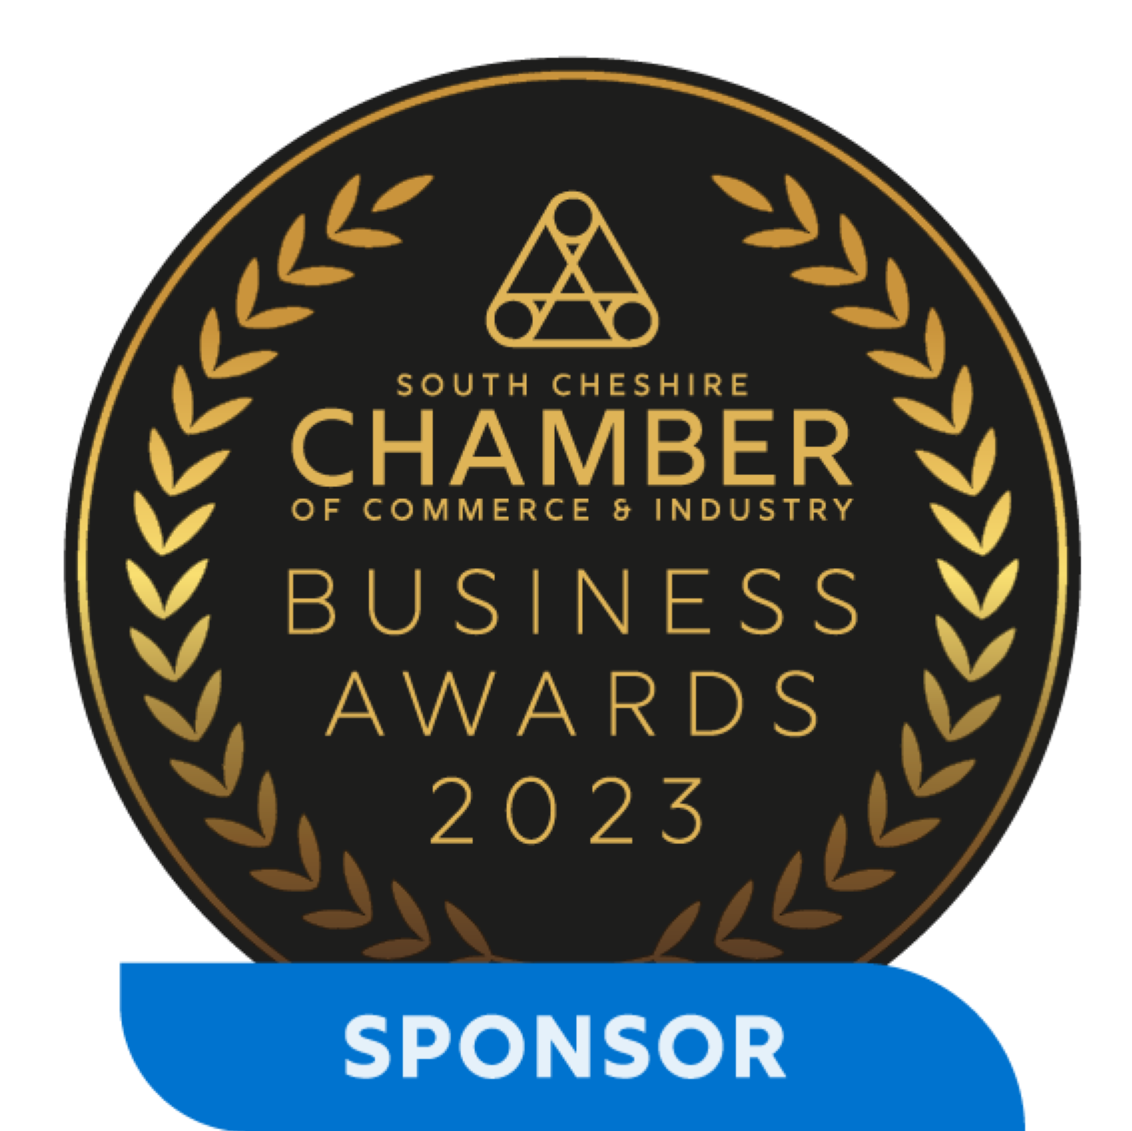 KPI sponsors South Cheshire Chamber Business Awards for 13th year